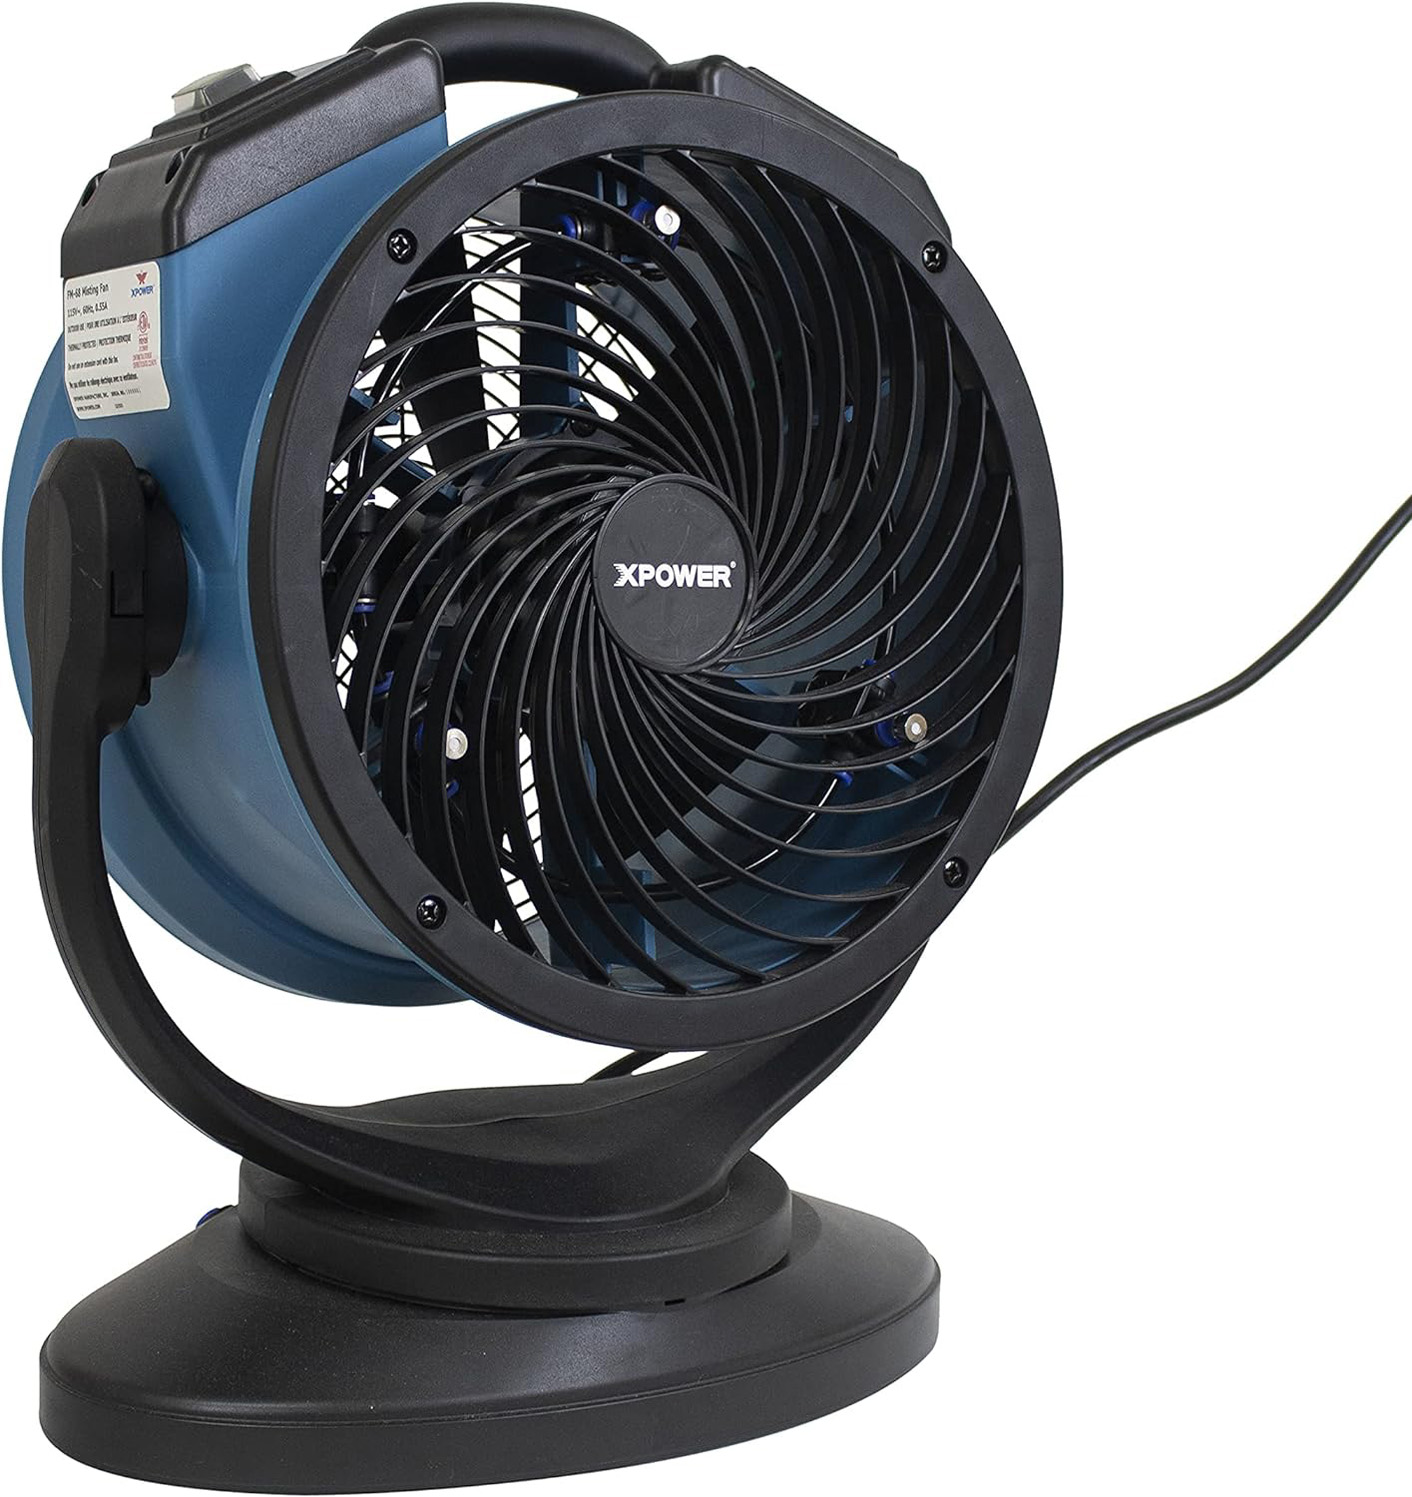 XPOWER FM-68 Oscillating Portable 3 Speed Outdoor Cooling Misting Fan and High Velocity Air Circulator